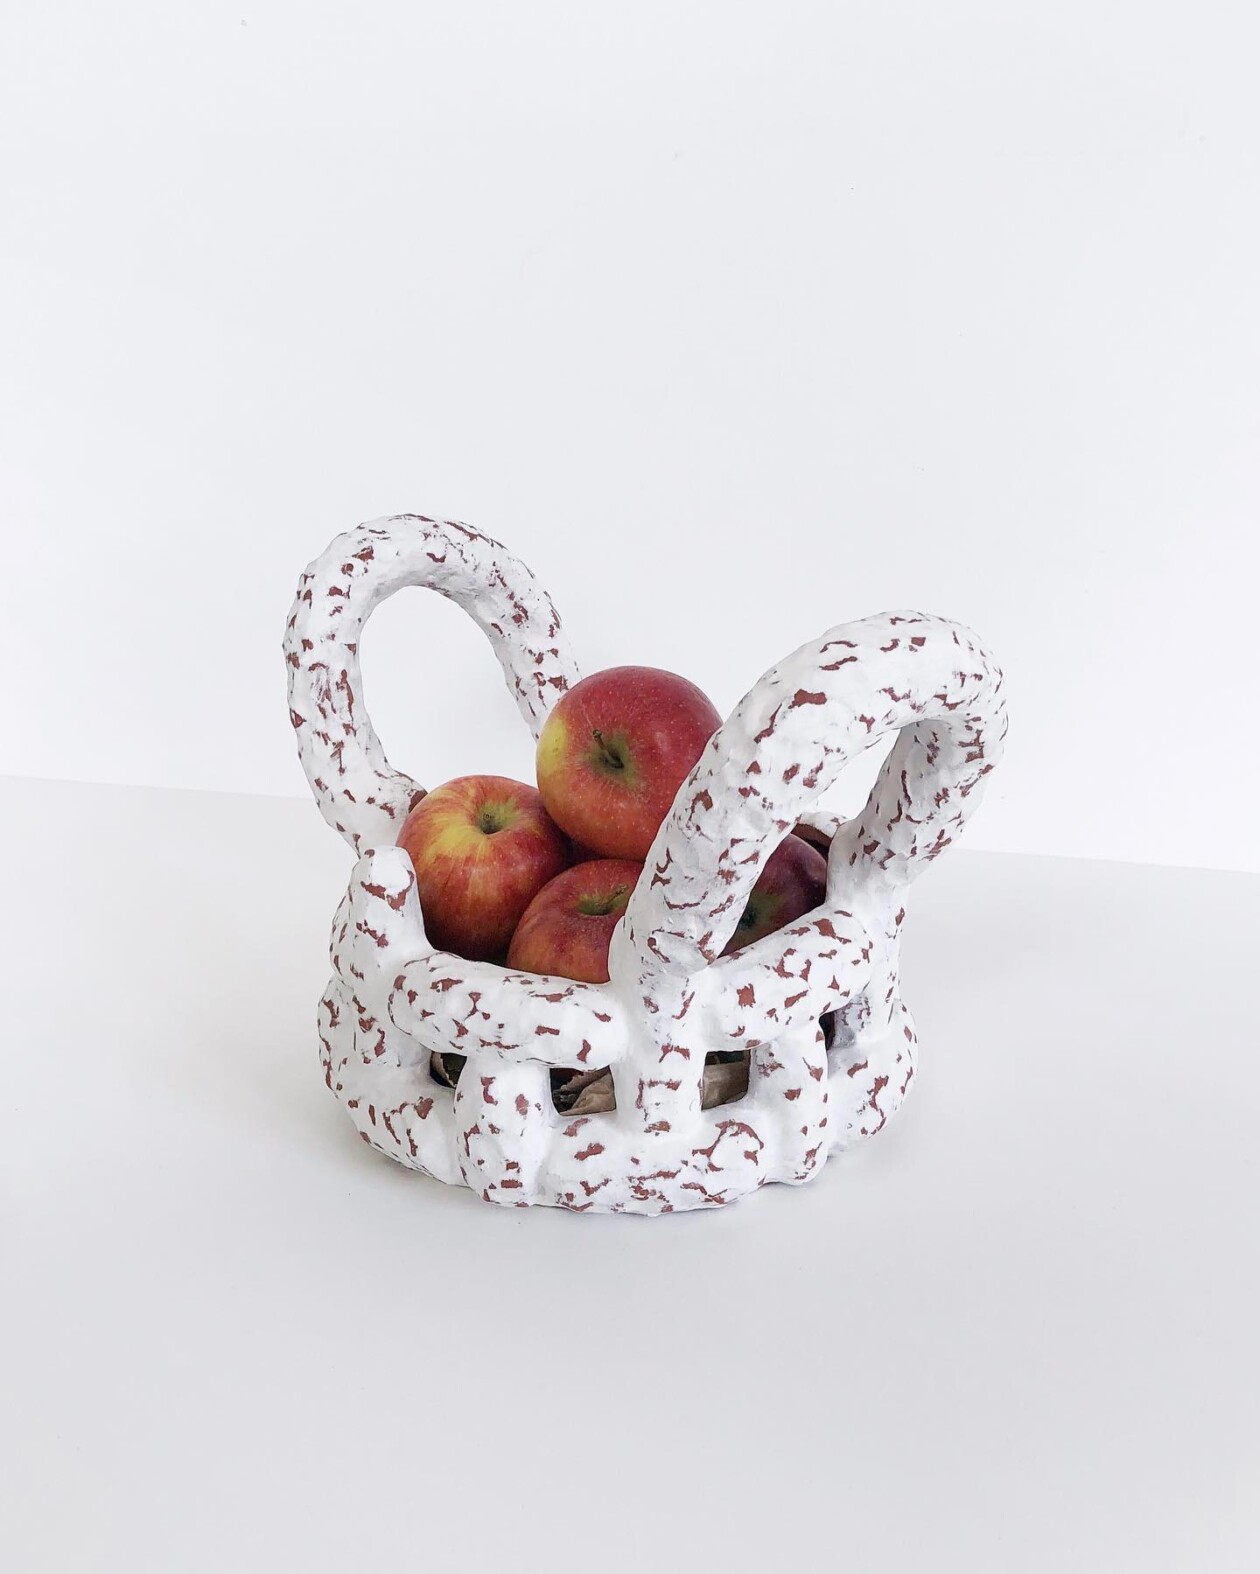 Food Based Ceramic Sculptures By Eléonore Joulin (3)